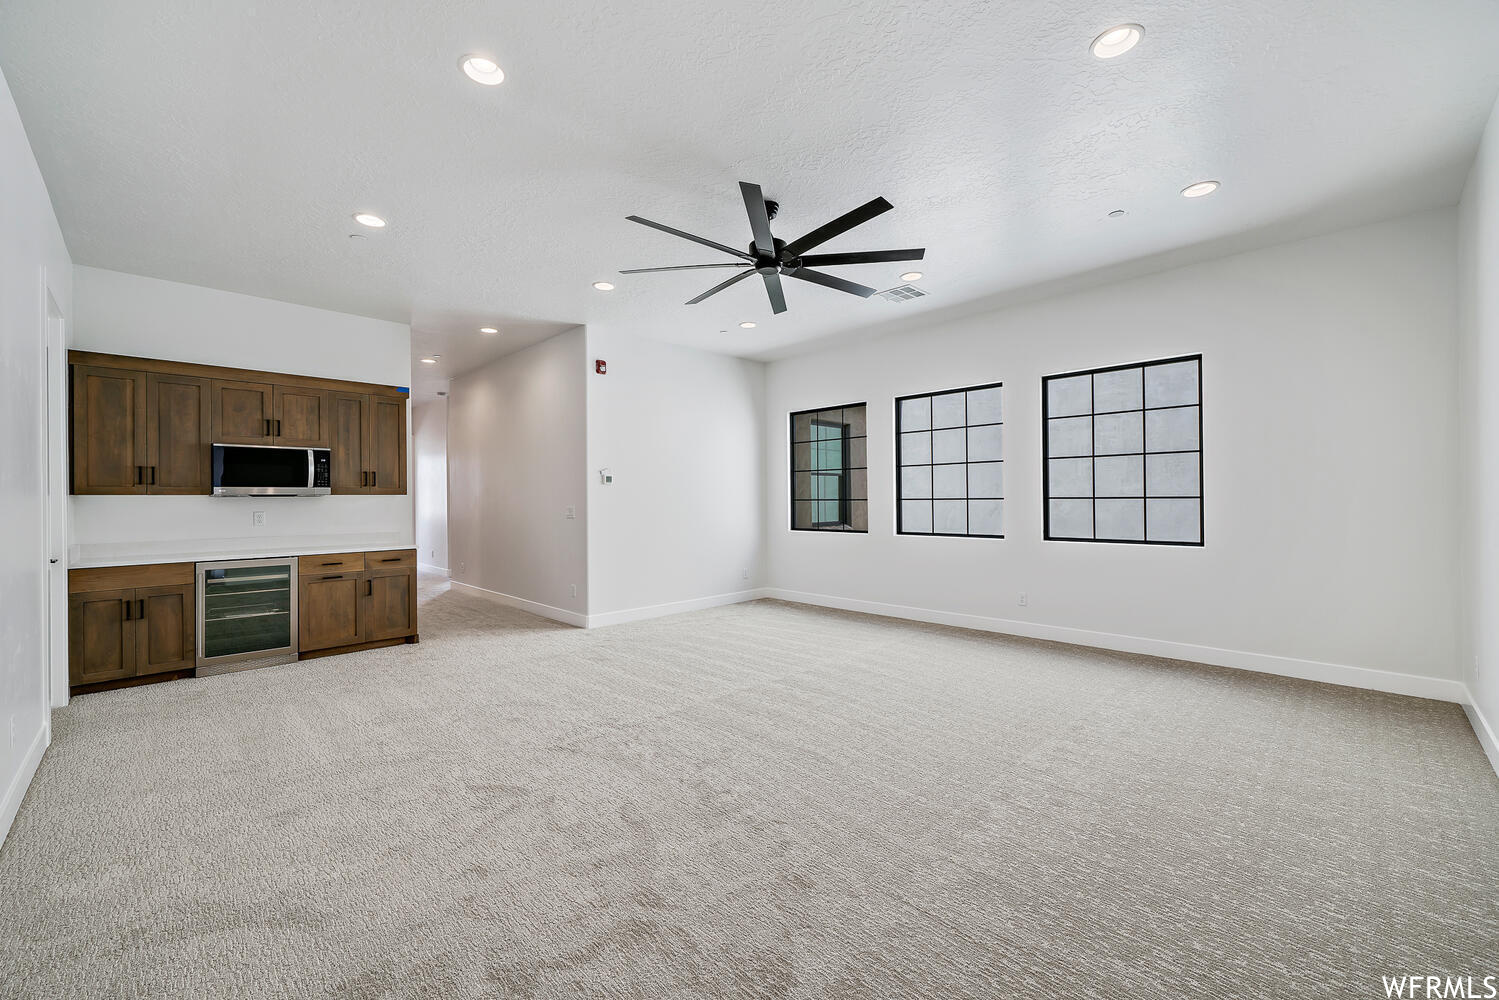 Interior space with a ceiling fan, microwave, and light flooring